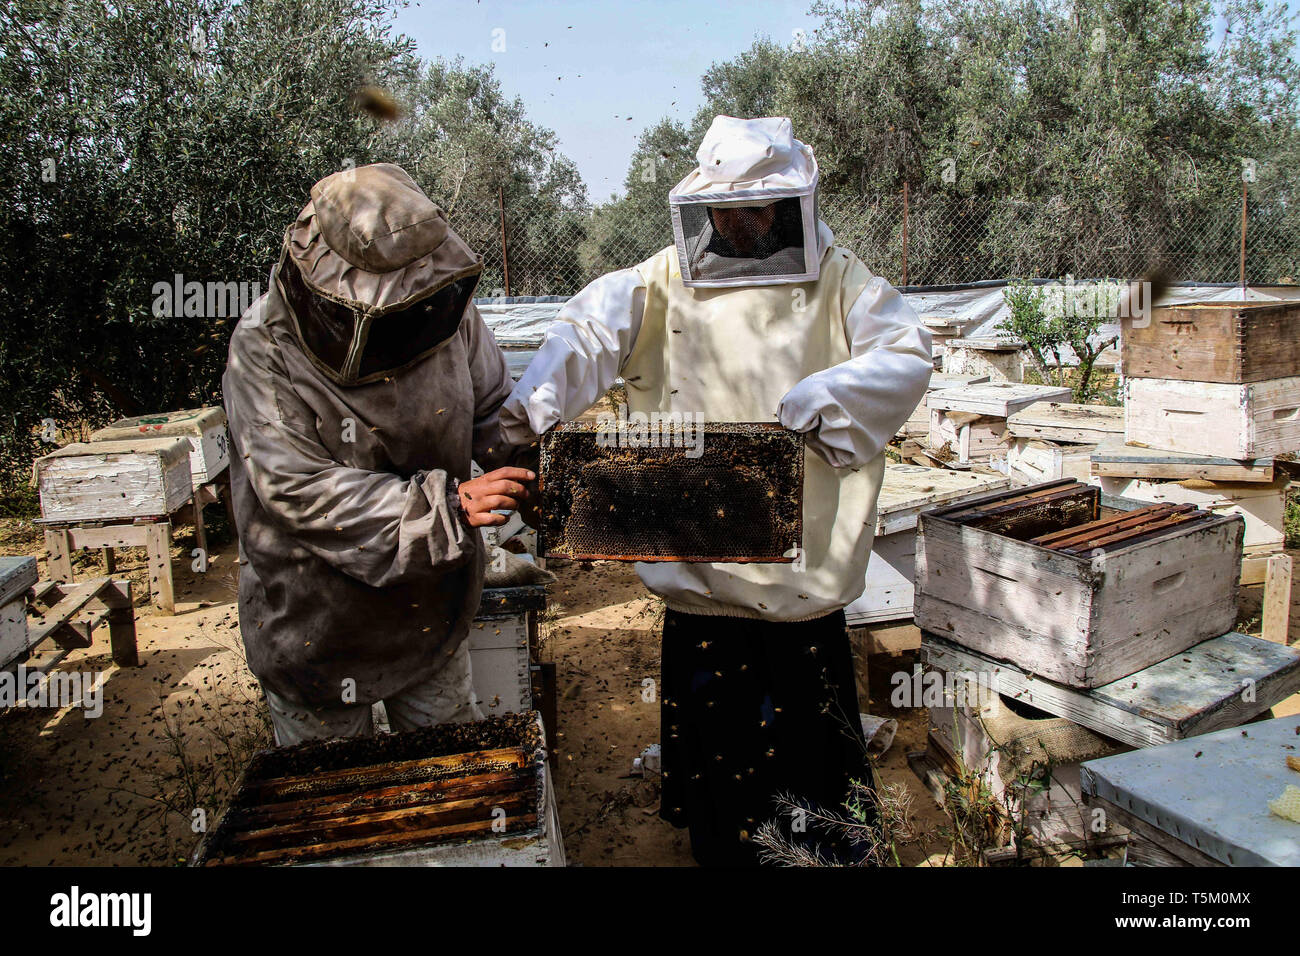 Gaza, Palestine. 25th Apr 2019. Palestinian farmer Talal Hamdan Abu Rouk and his wife Jihad collect honey from the racks of their beehives in the Khuza'a village in the eastern part of Khan Younis in the southern Gaza strip. Tala and Jihad have been looking after their apiary during the last ten years, although their beehives have faced much destruction during the recent Israeli attacks on Gaza. Credit: ZUMA Press, Inc./Alamy Live News Stock Photo